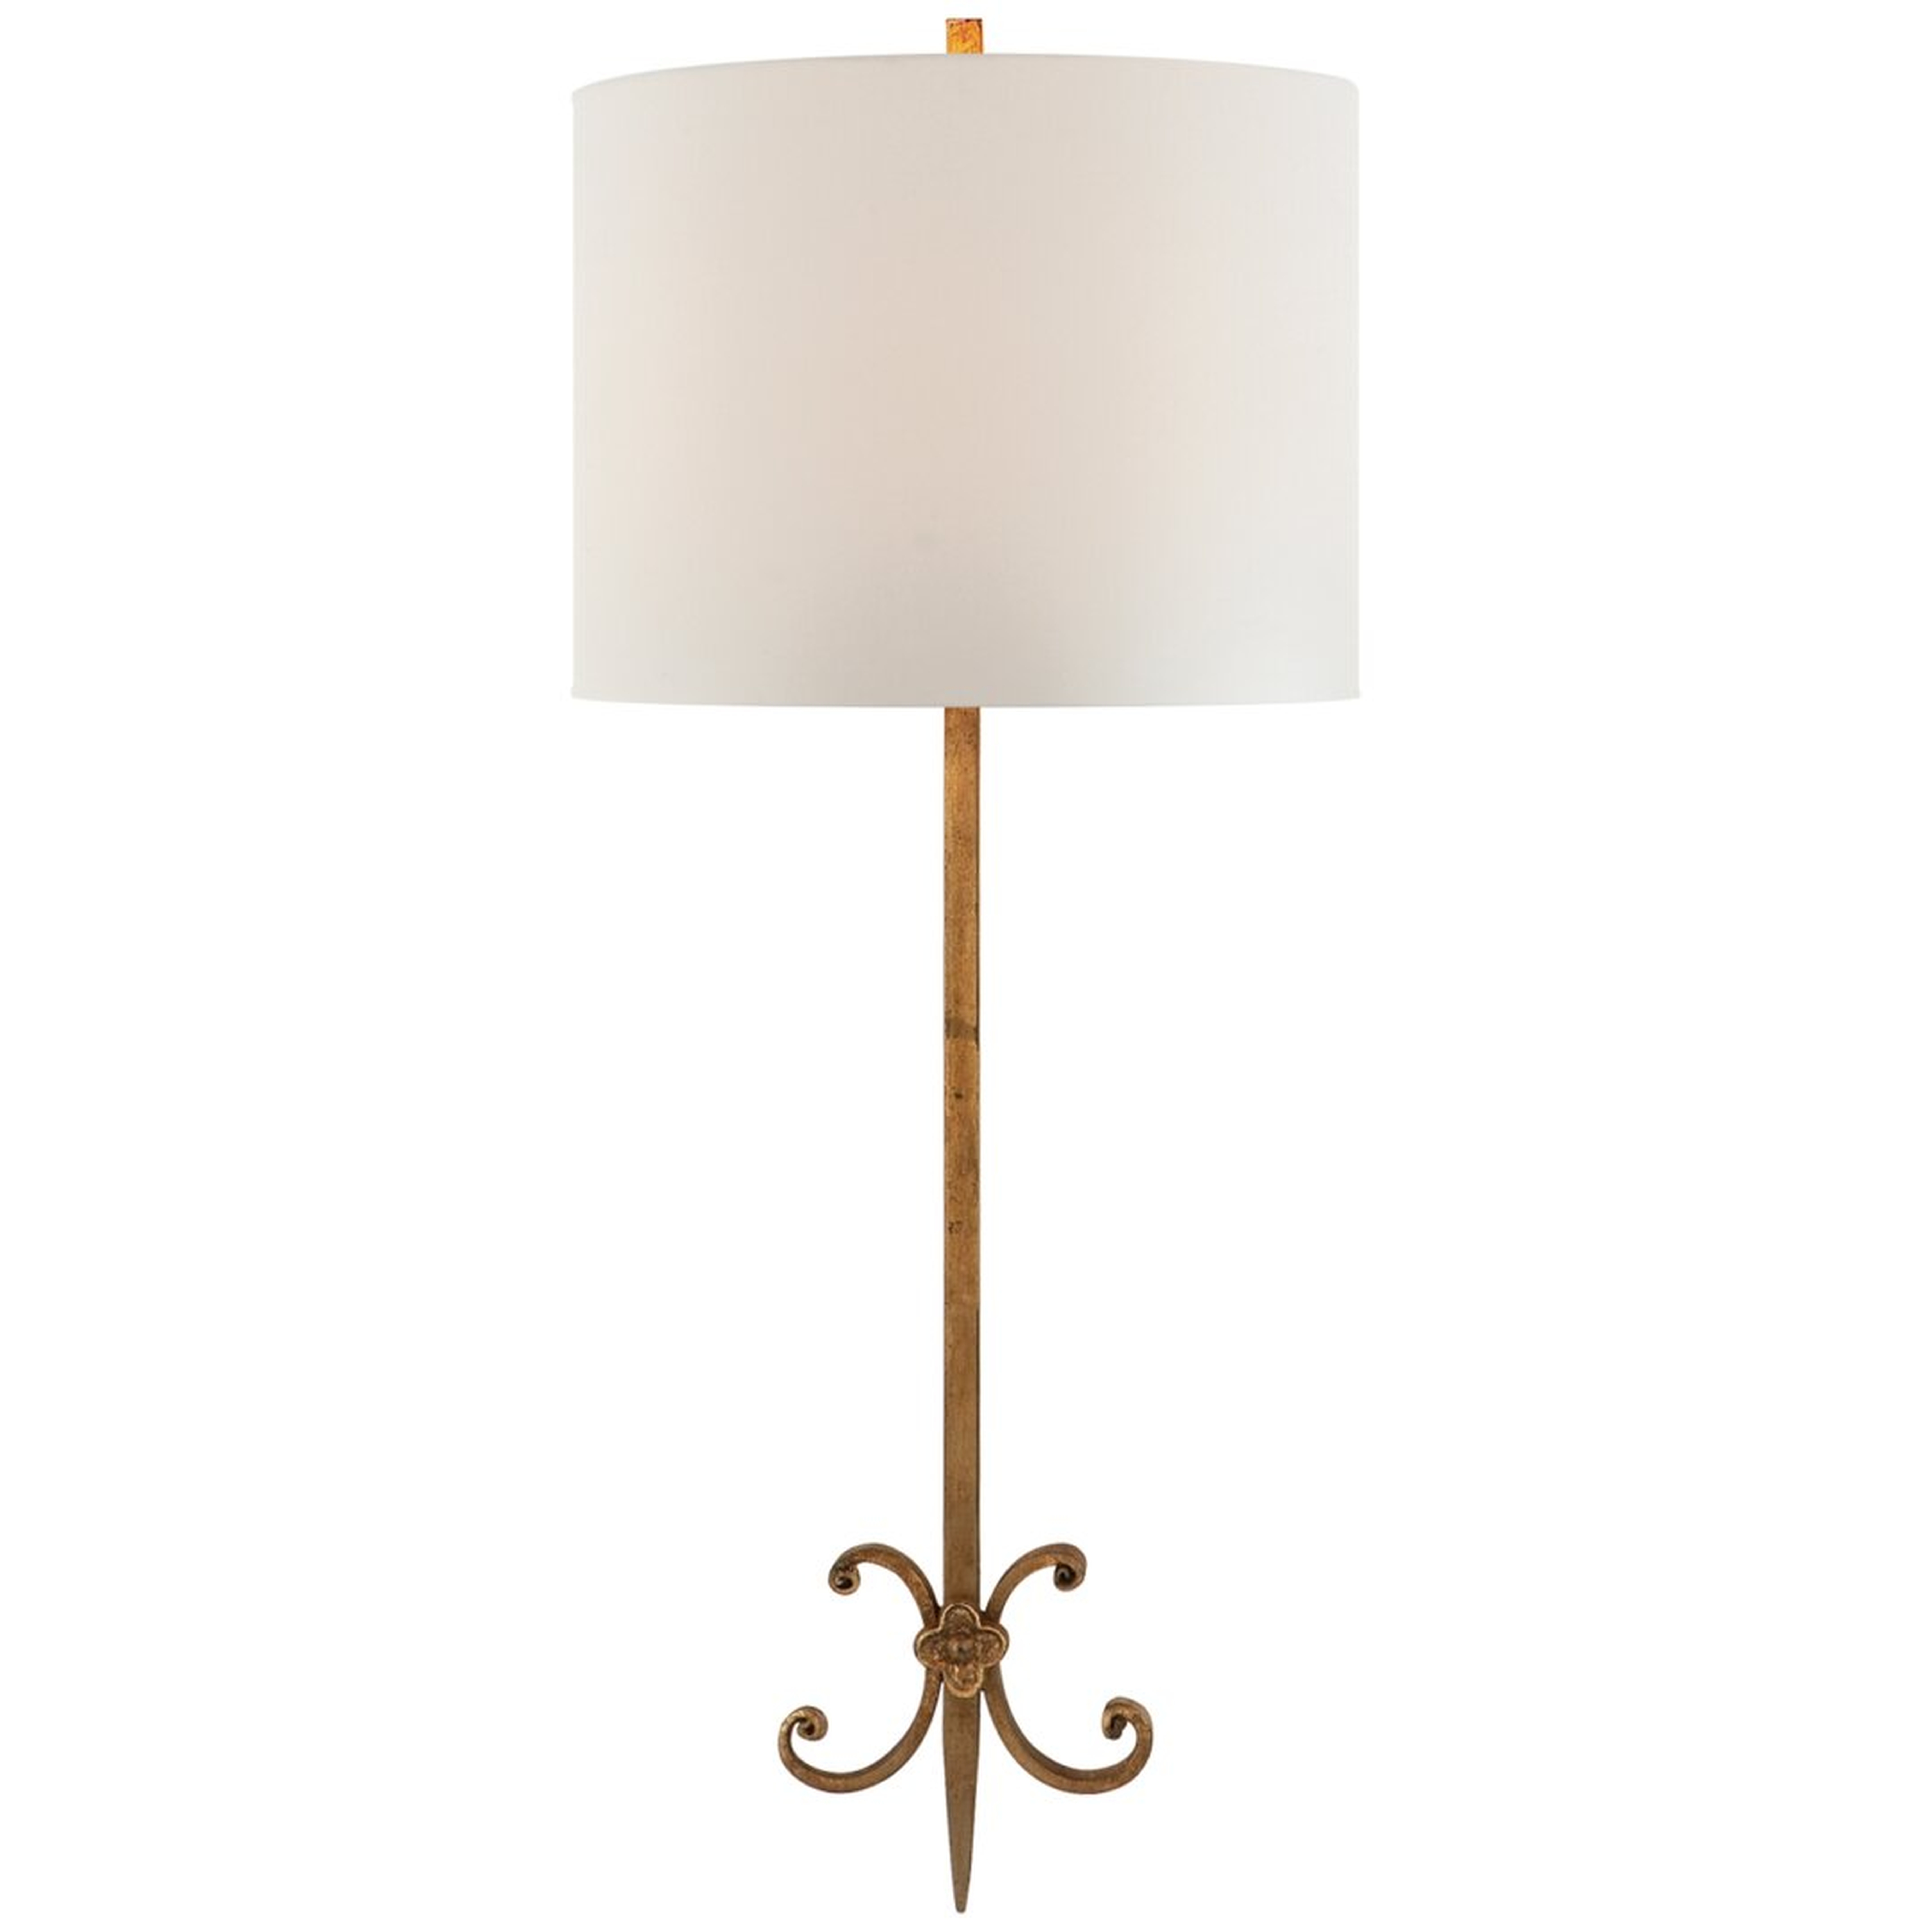 "Visual Comfort Roswell Sconce by Suzanne Kasler" - Perigold